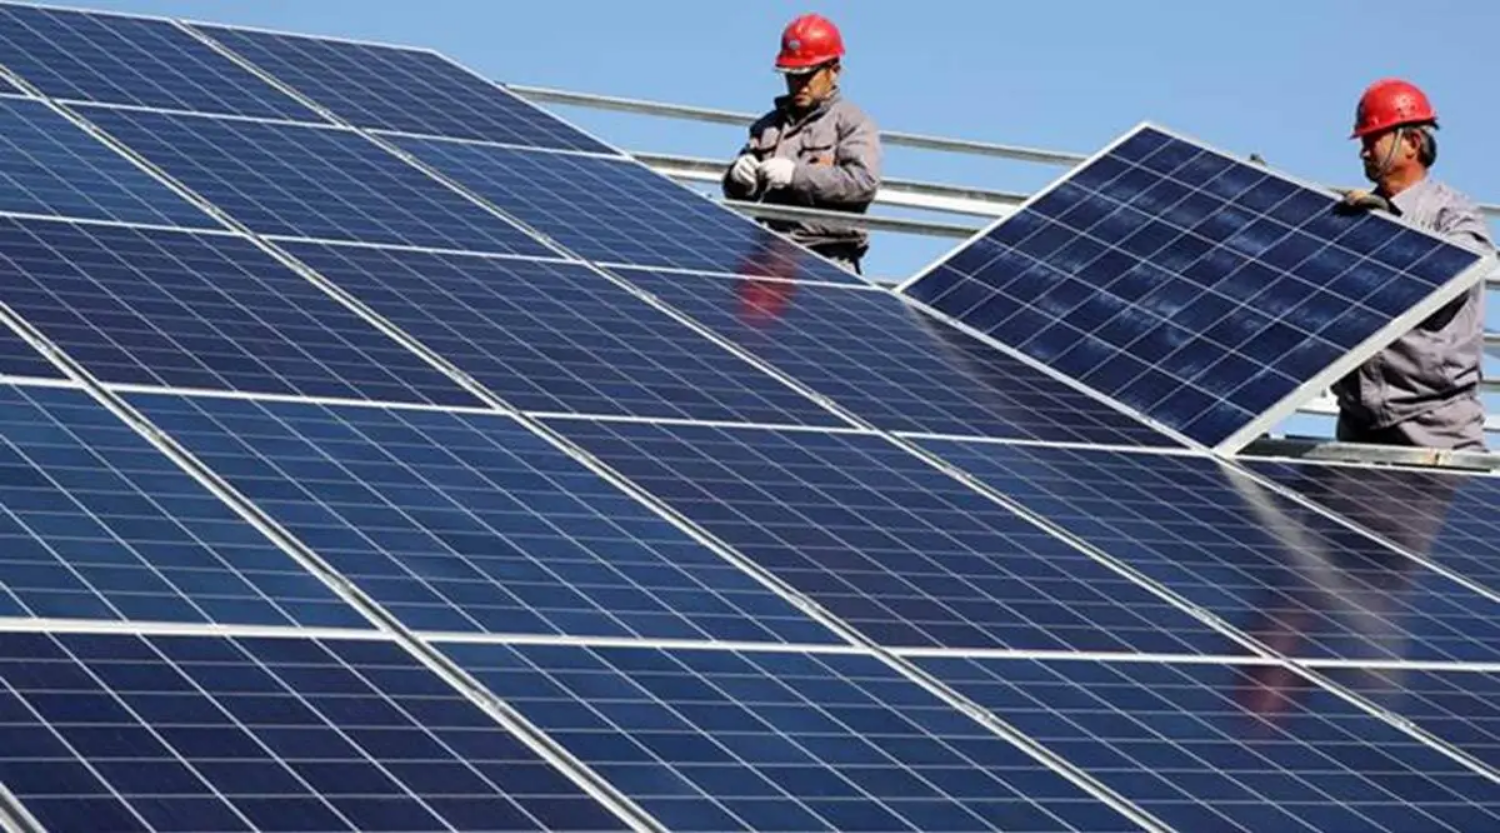 Govt push sees players lining up to make solar equipment